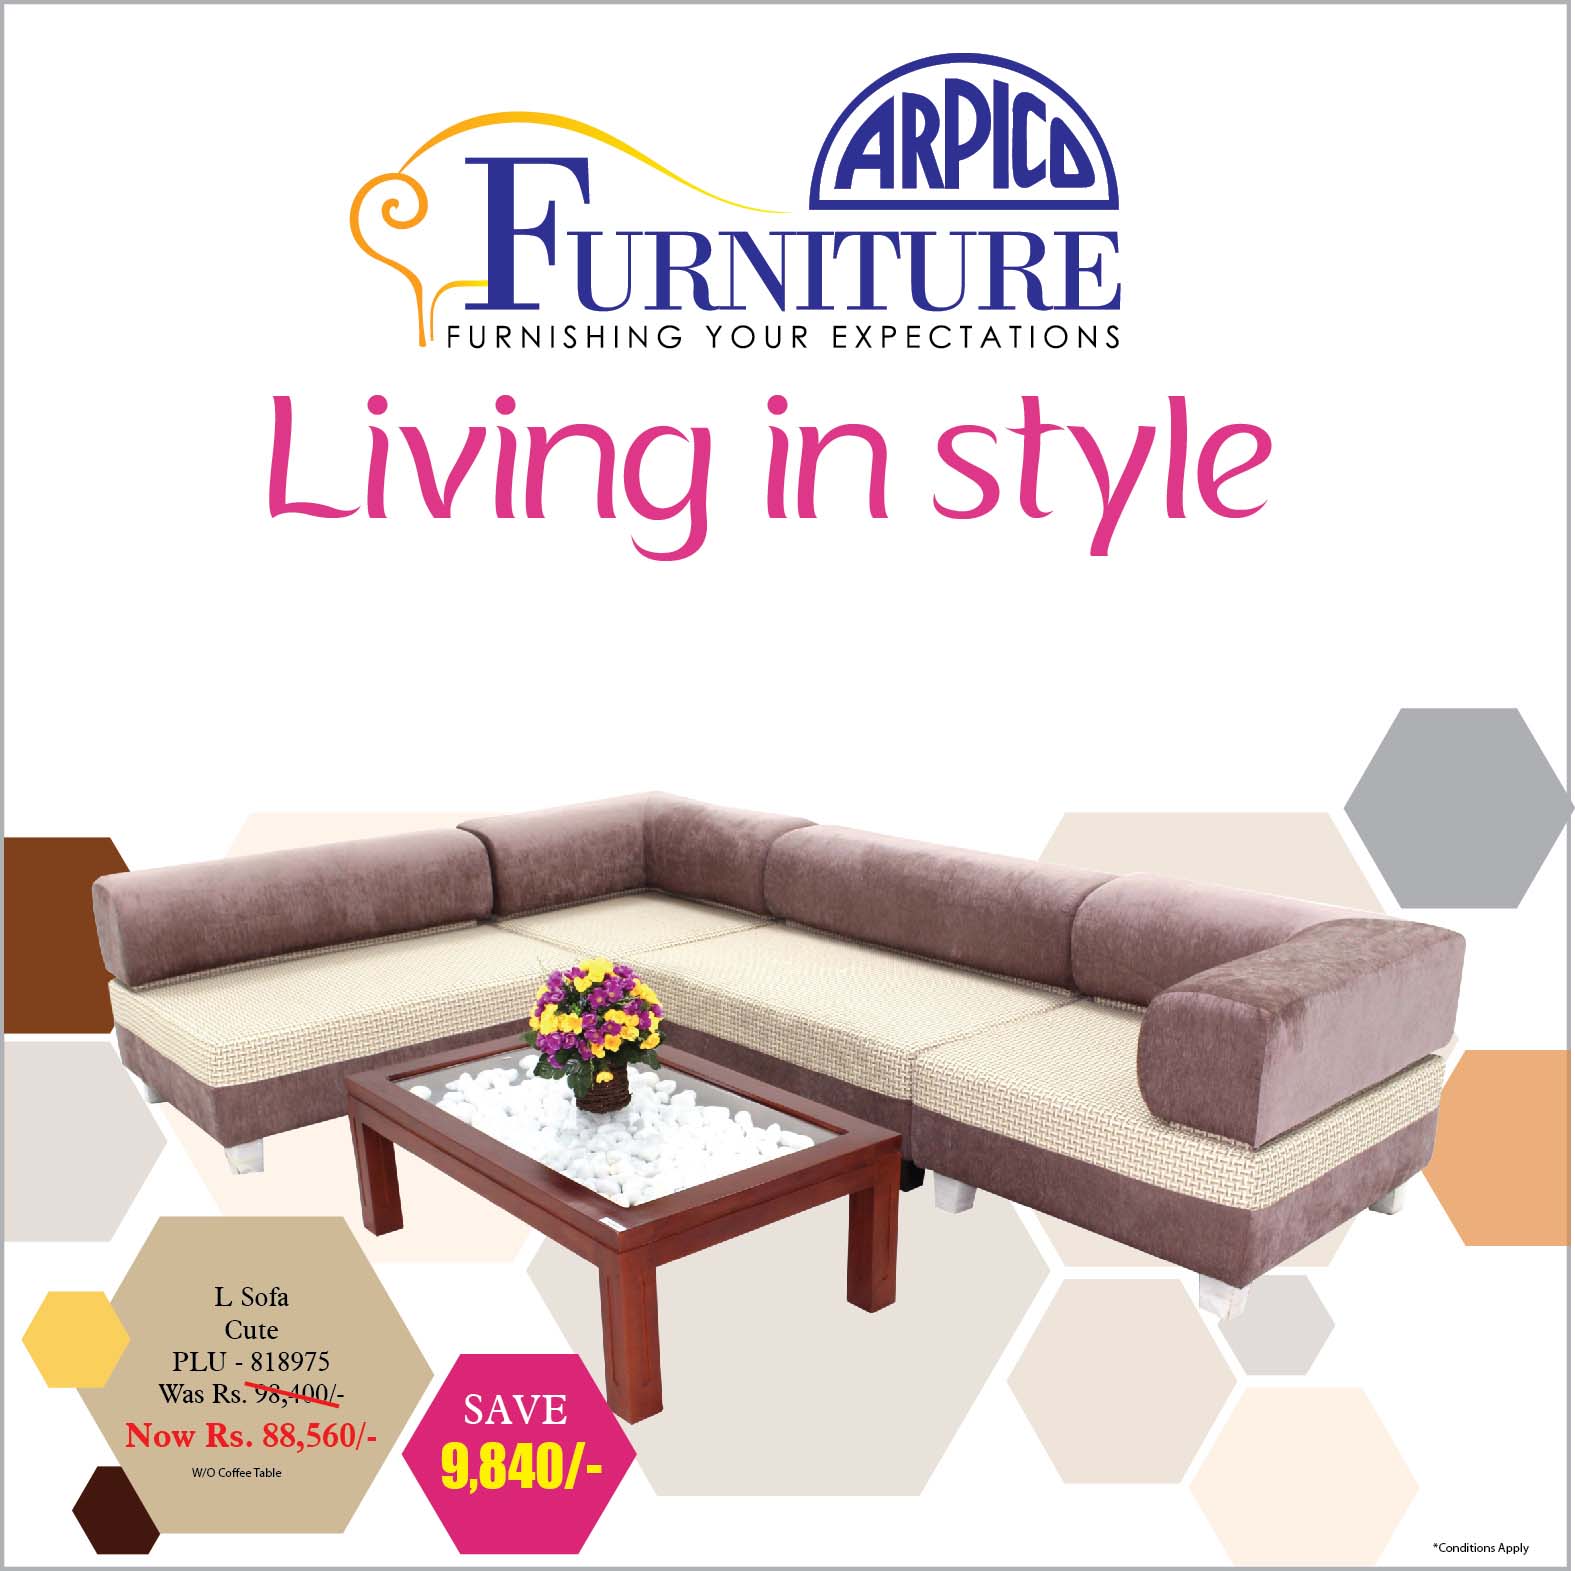 Arpico Furniture On Twitter Create Inviting Spacious Comfort In Your Home With This Stylish L Sofa Cute Take A Closer Look Https T Co Xsdz8uzs7z Https T Co 55etvtlifg